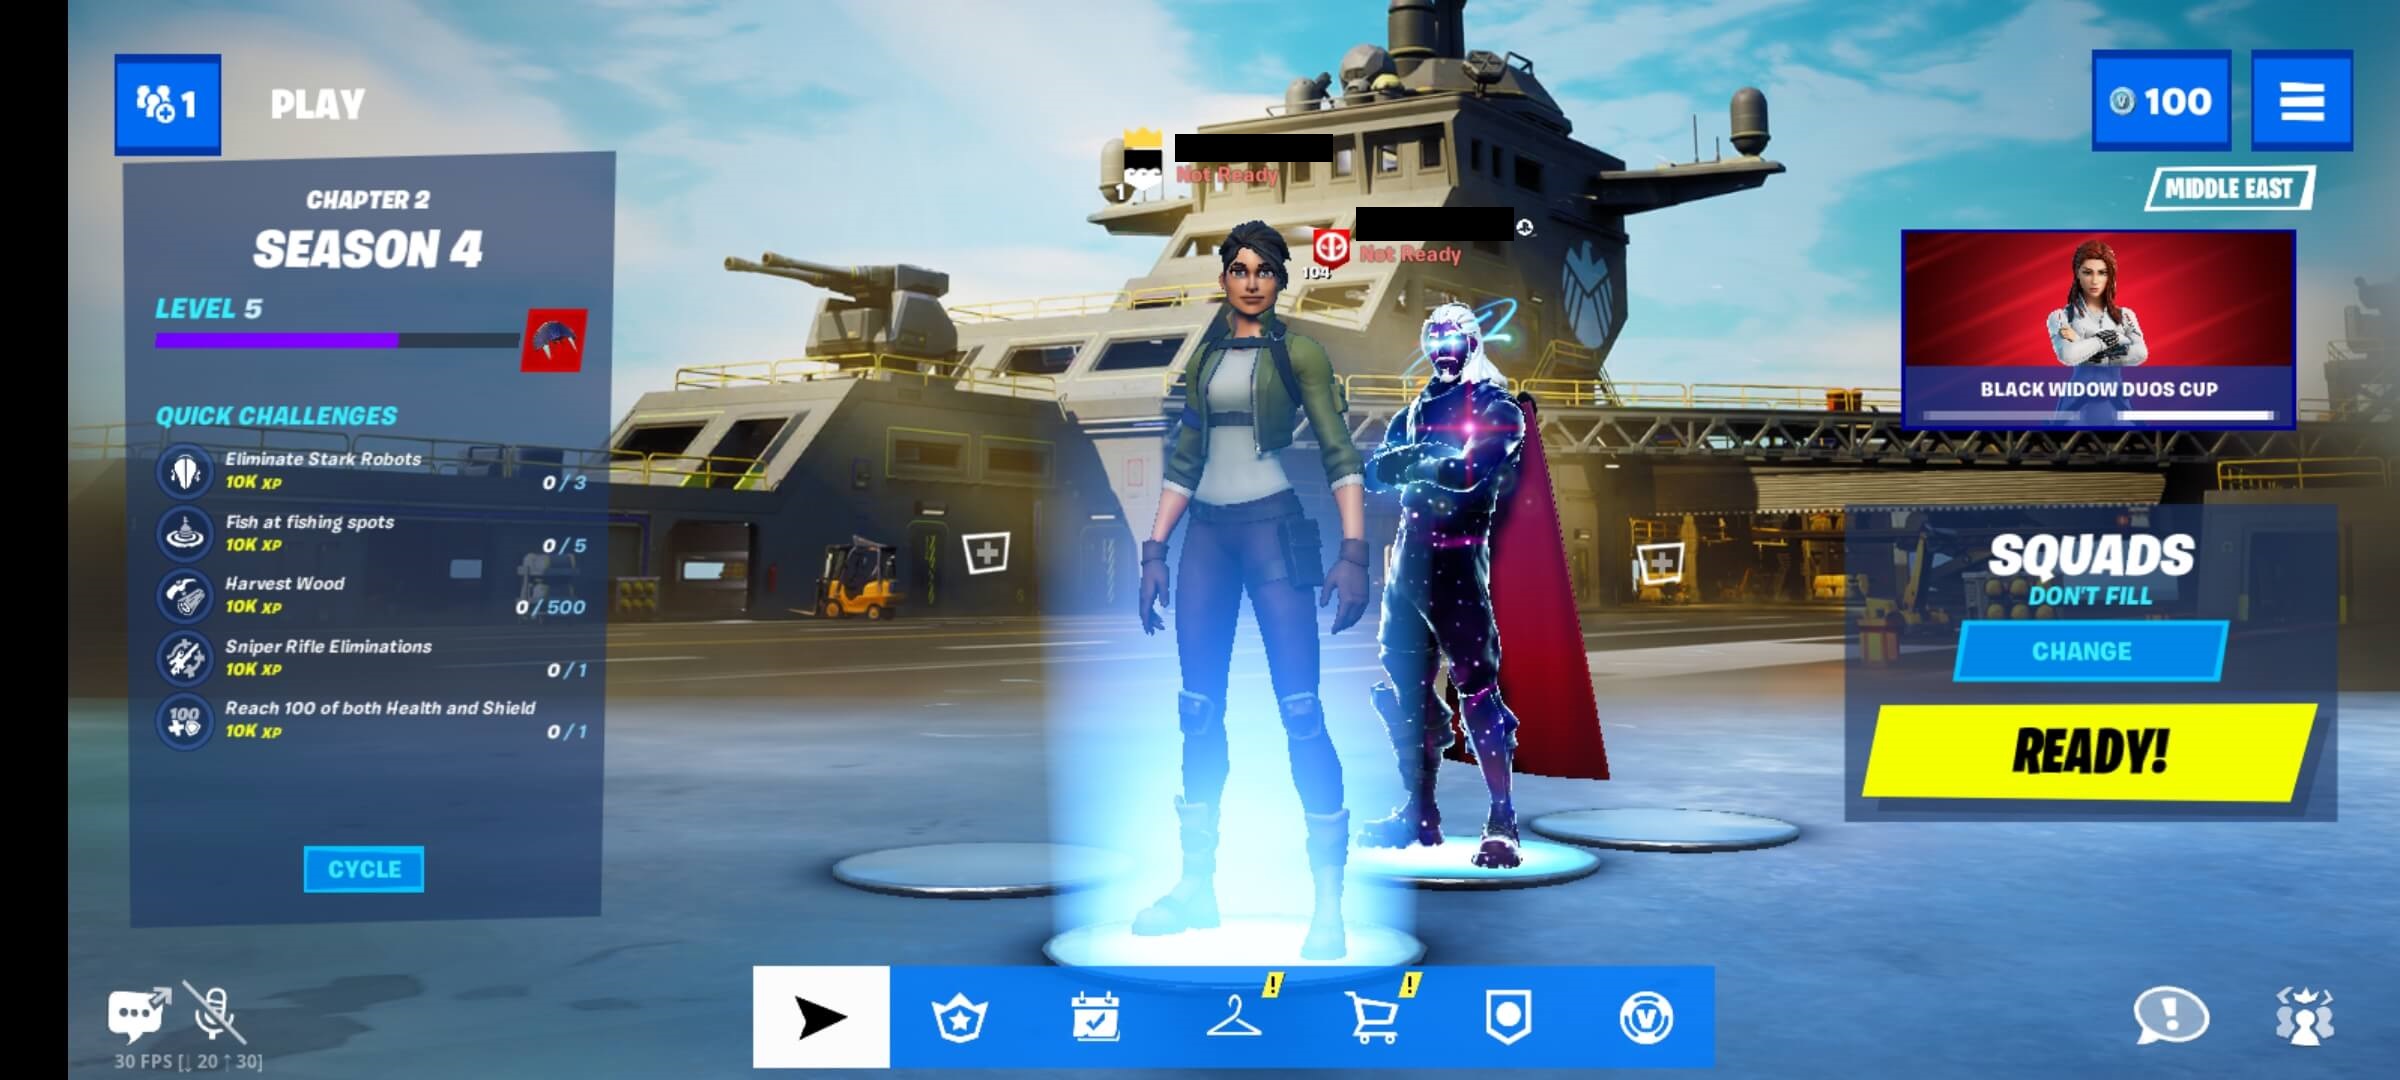 PlayStation allows Fortnite crossplay for Xbox, other devices